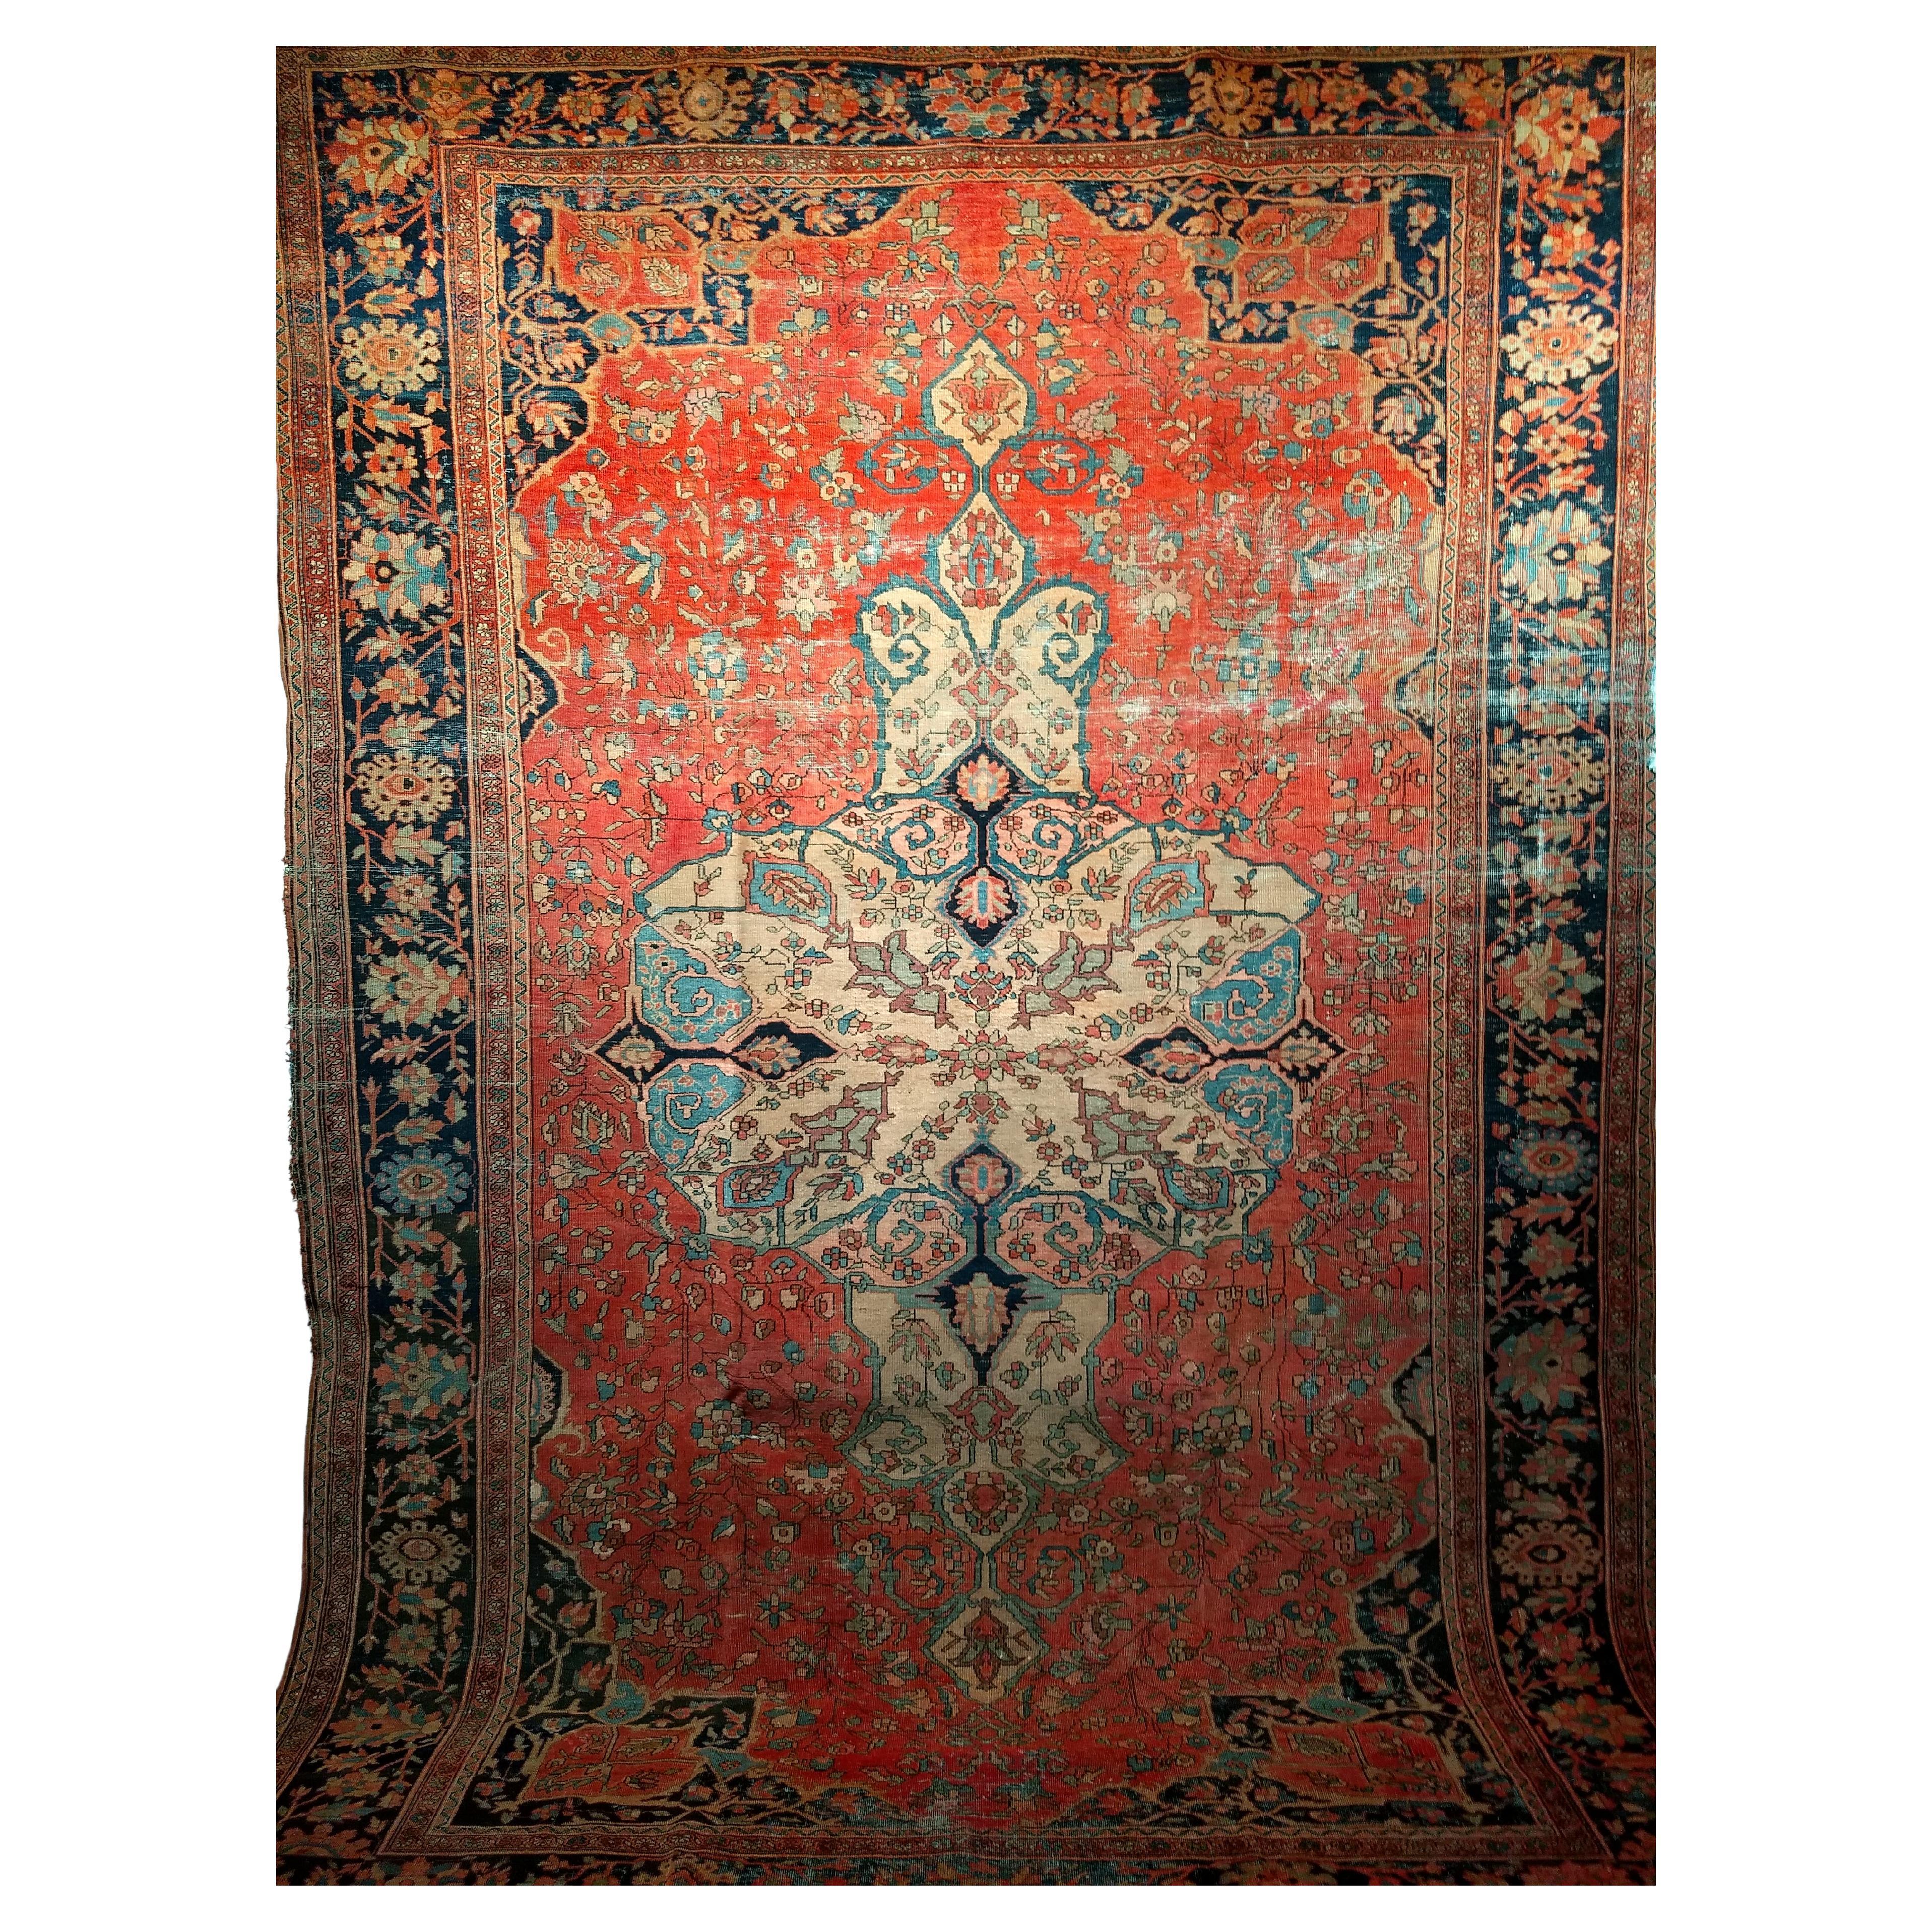  A Persian Farahan room size rug from the late 1800s.  Beauty, sophisticated design, and palate of natural dyes brought together in this Farahan rug with the Persian Garden design has an extremely fine weave. The rug has a red color field with a